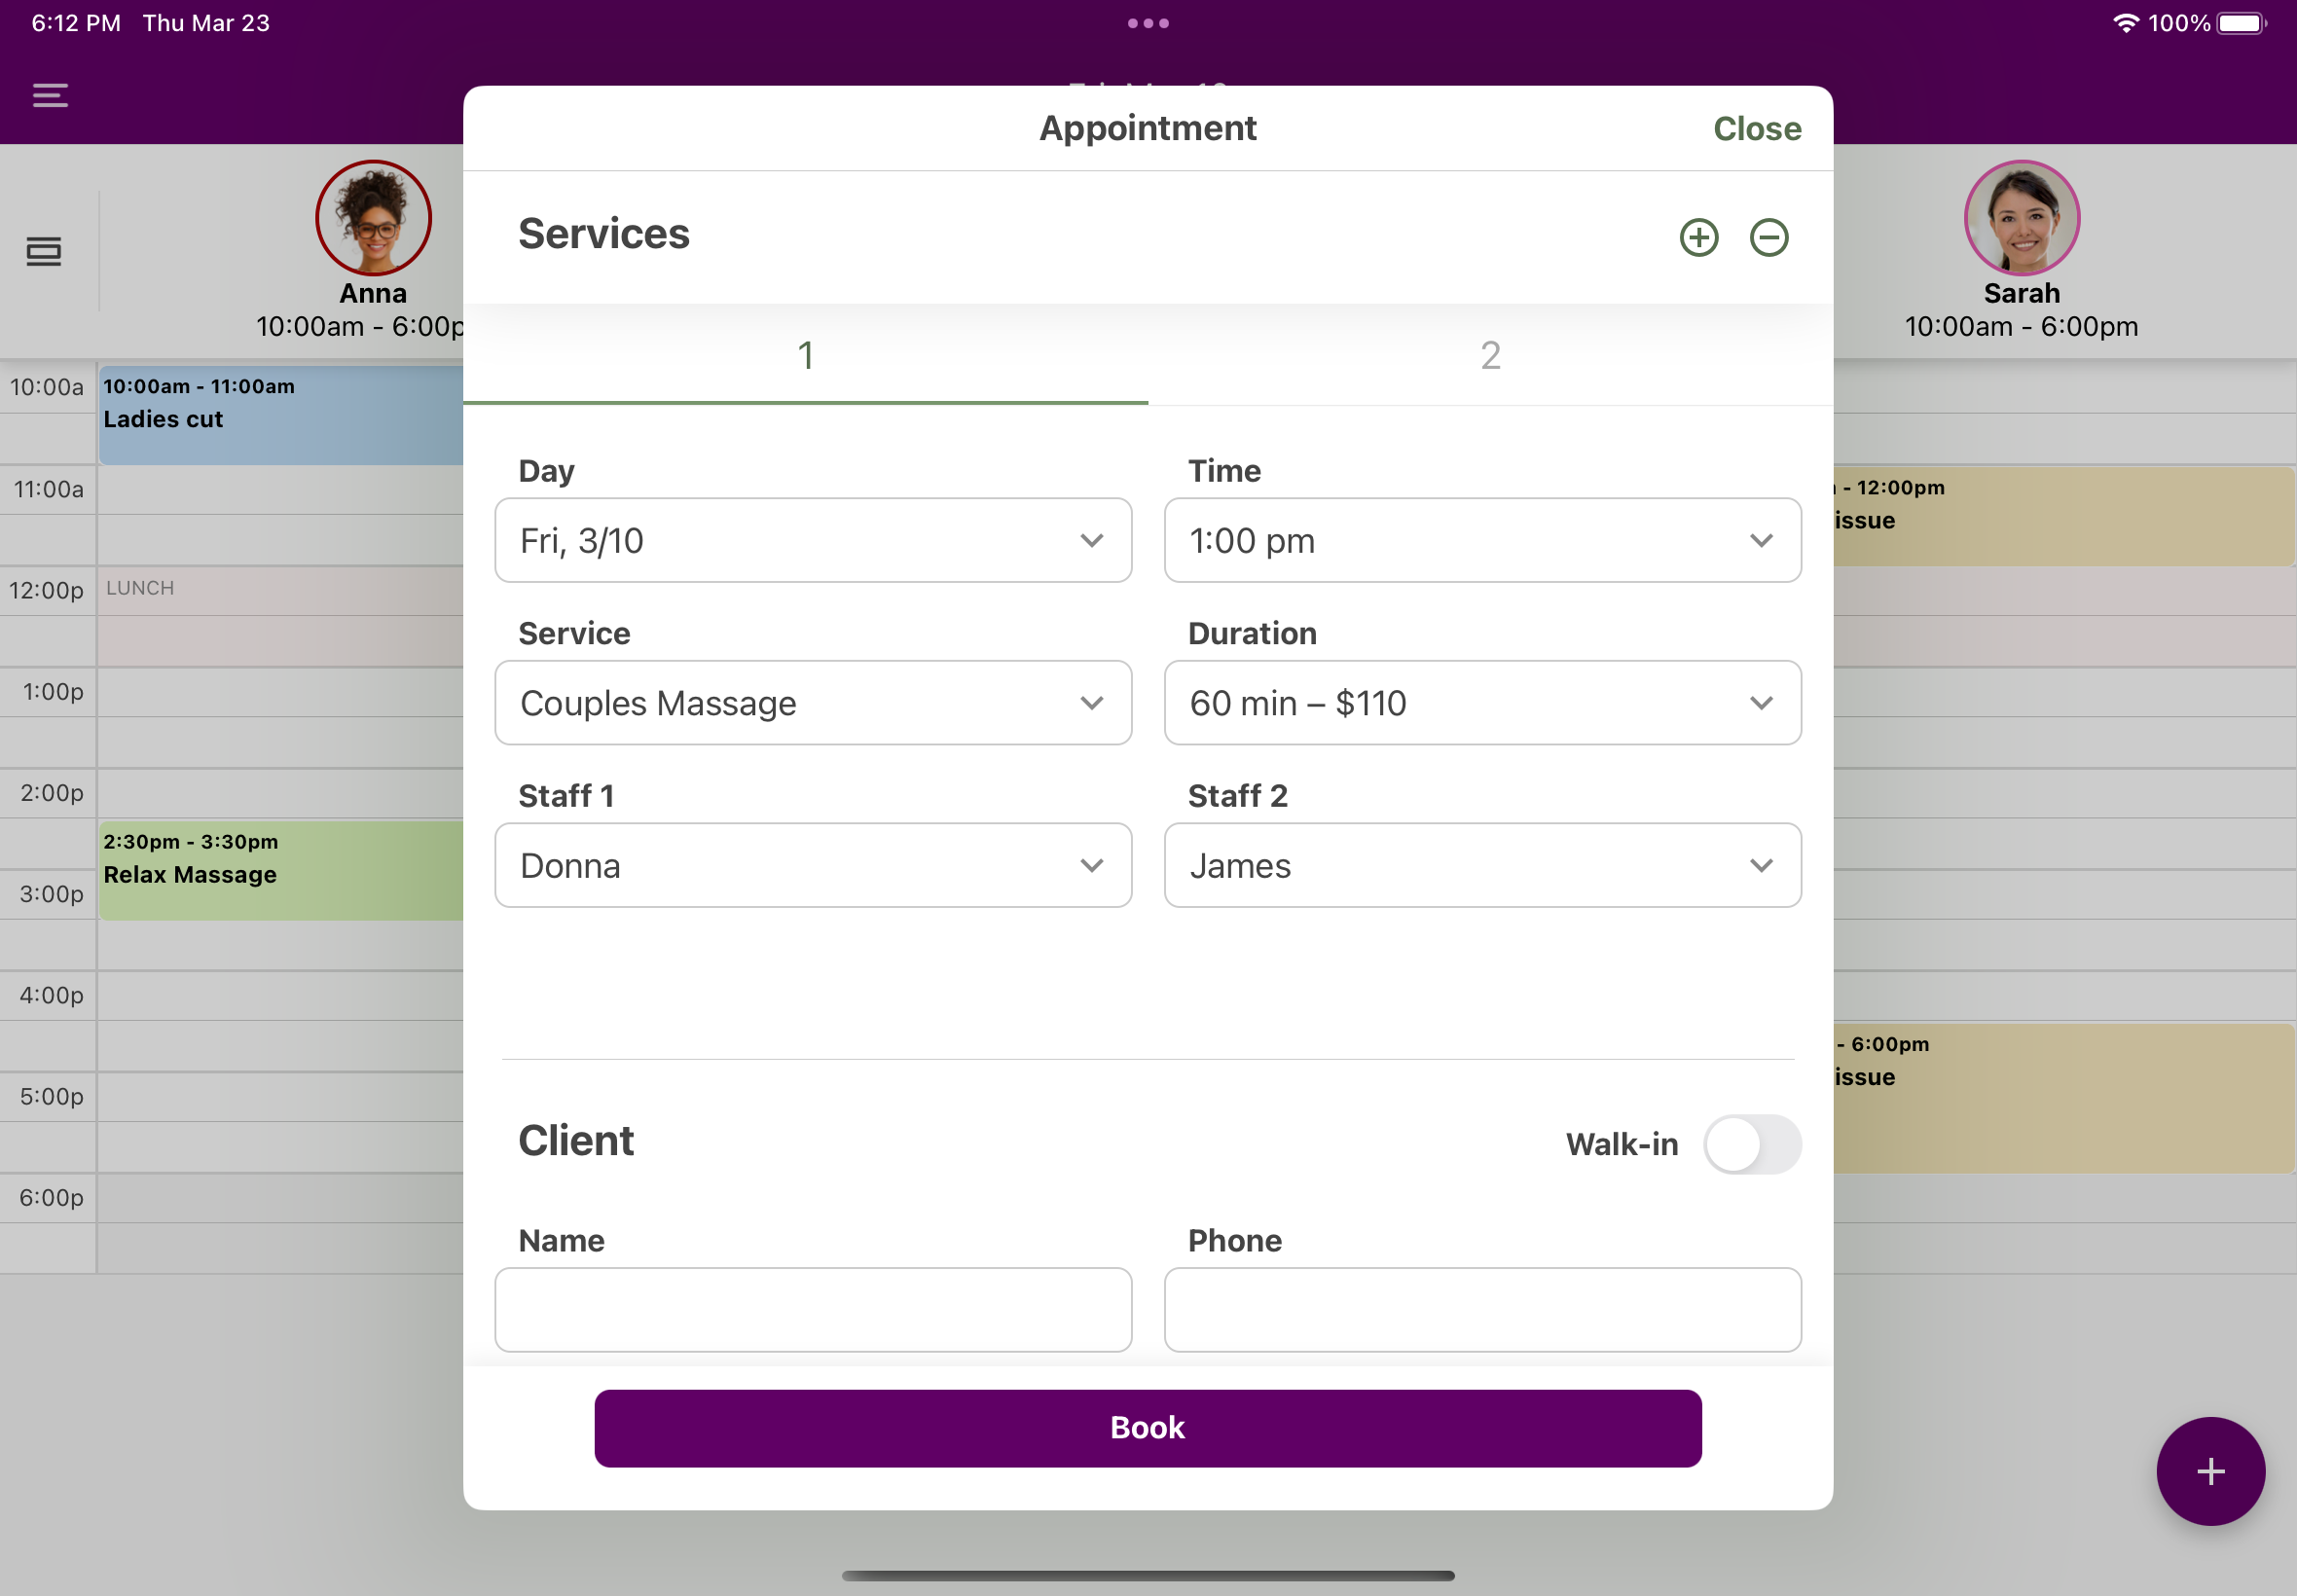 The appointment popup window. When a staff member begins to add a new appointment, the system makes intellligent guesses and pre-selects the values to make the process as simple and painless as possible.